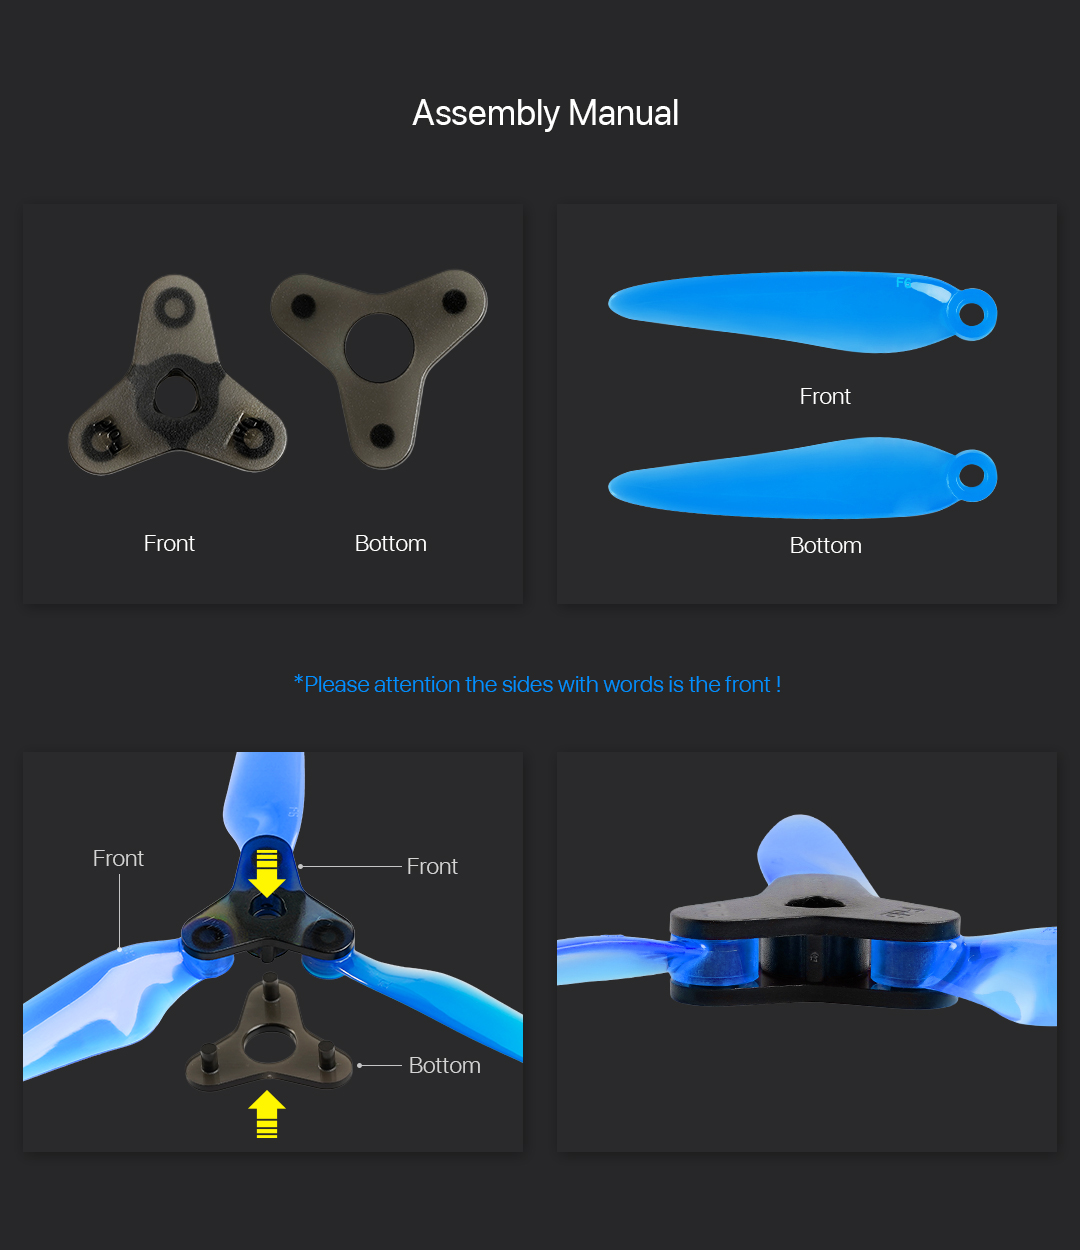 Dalprop Fold F6 6" Folding Propeller DIY Smooth Props Long Range Compatible POPO for FPV Racing RC Drone - Photo: 3